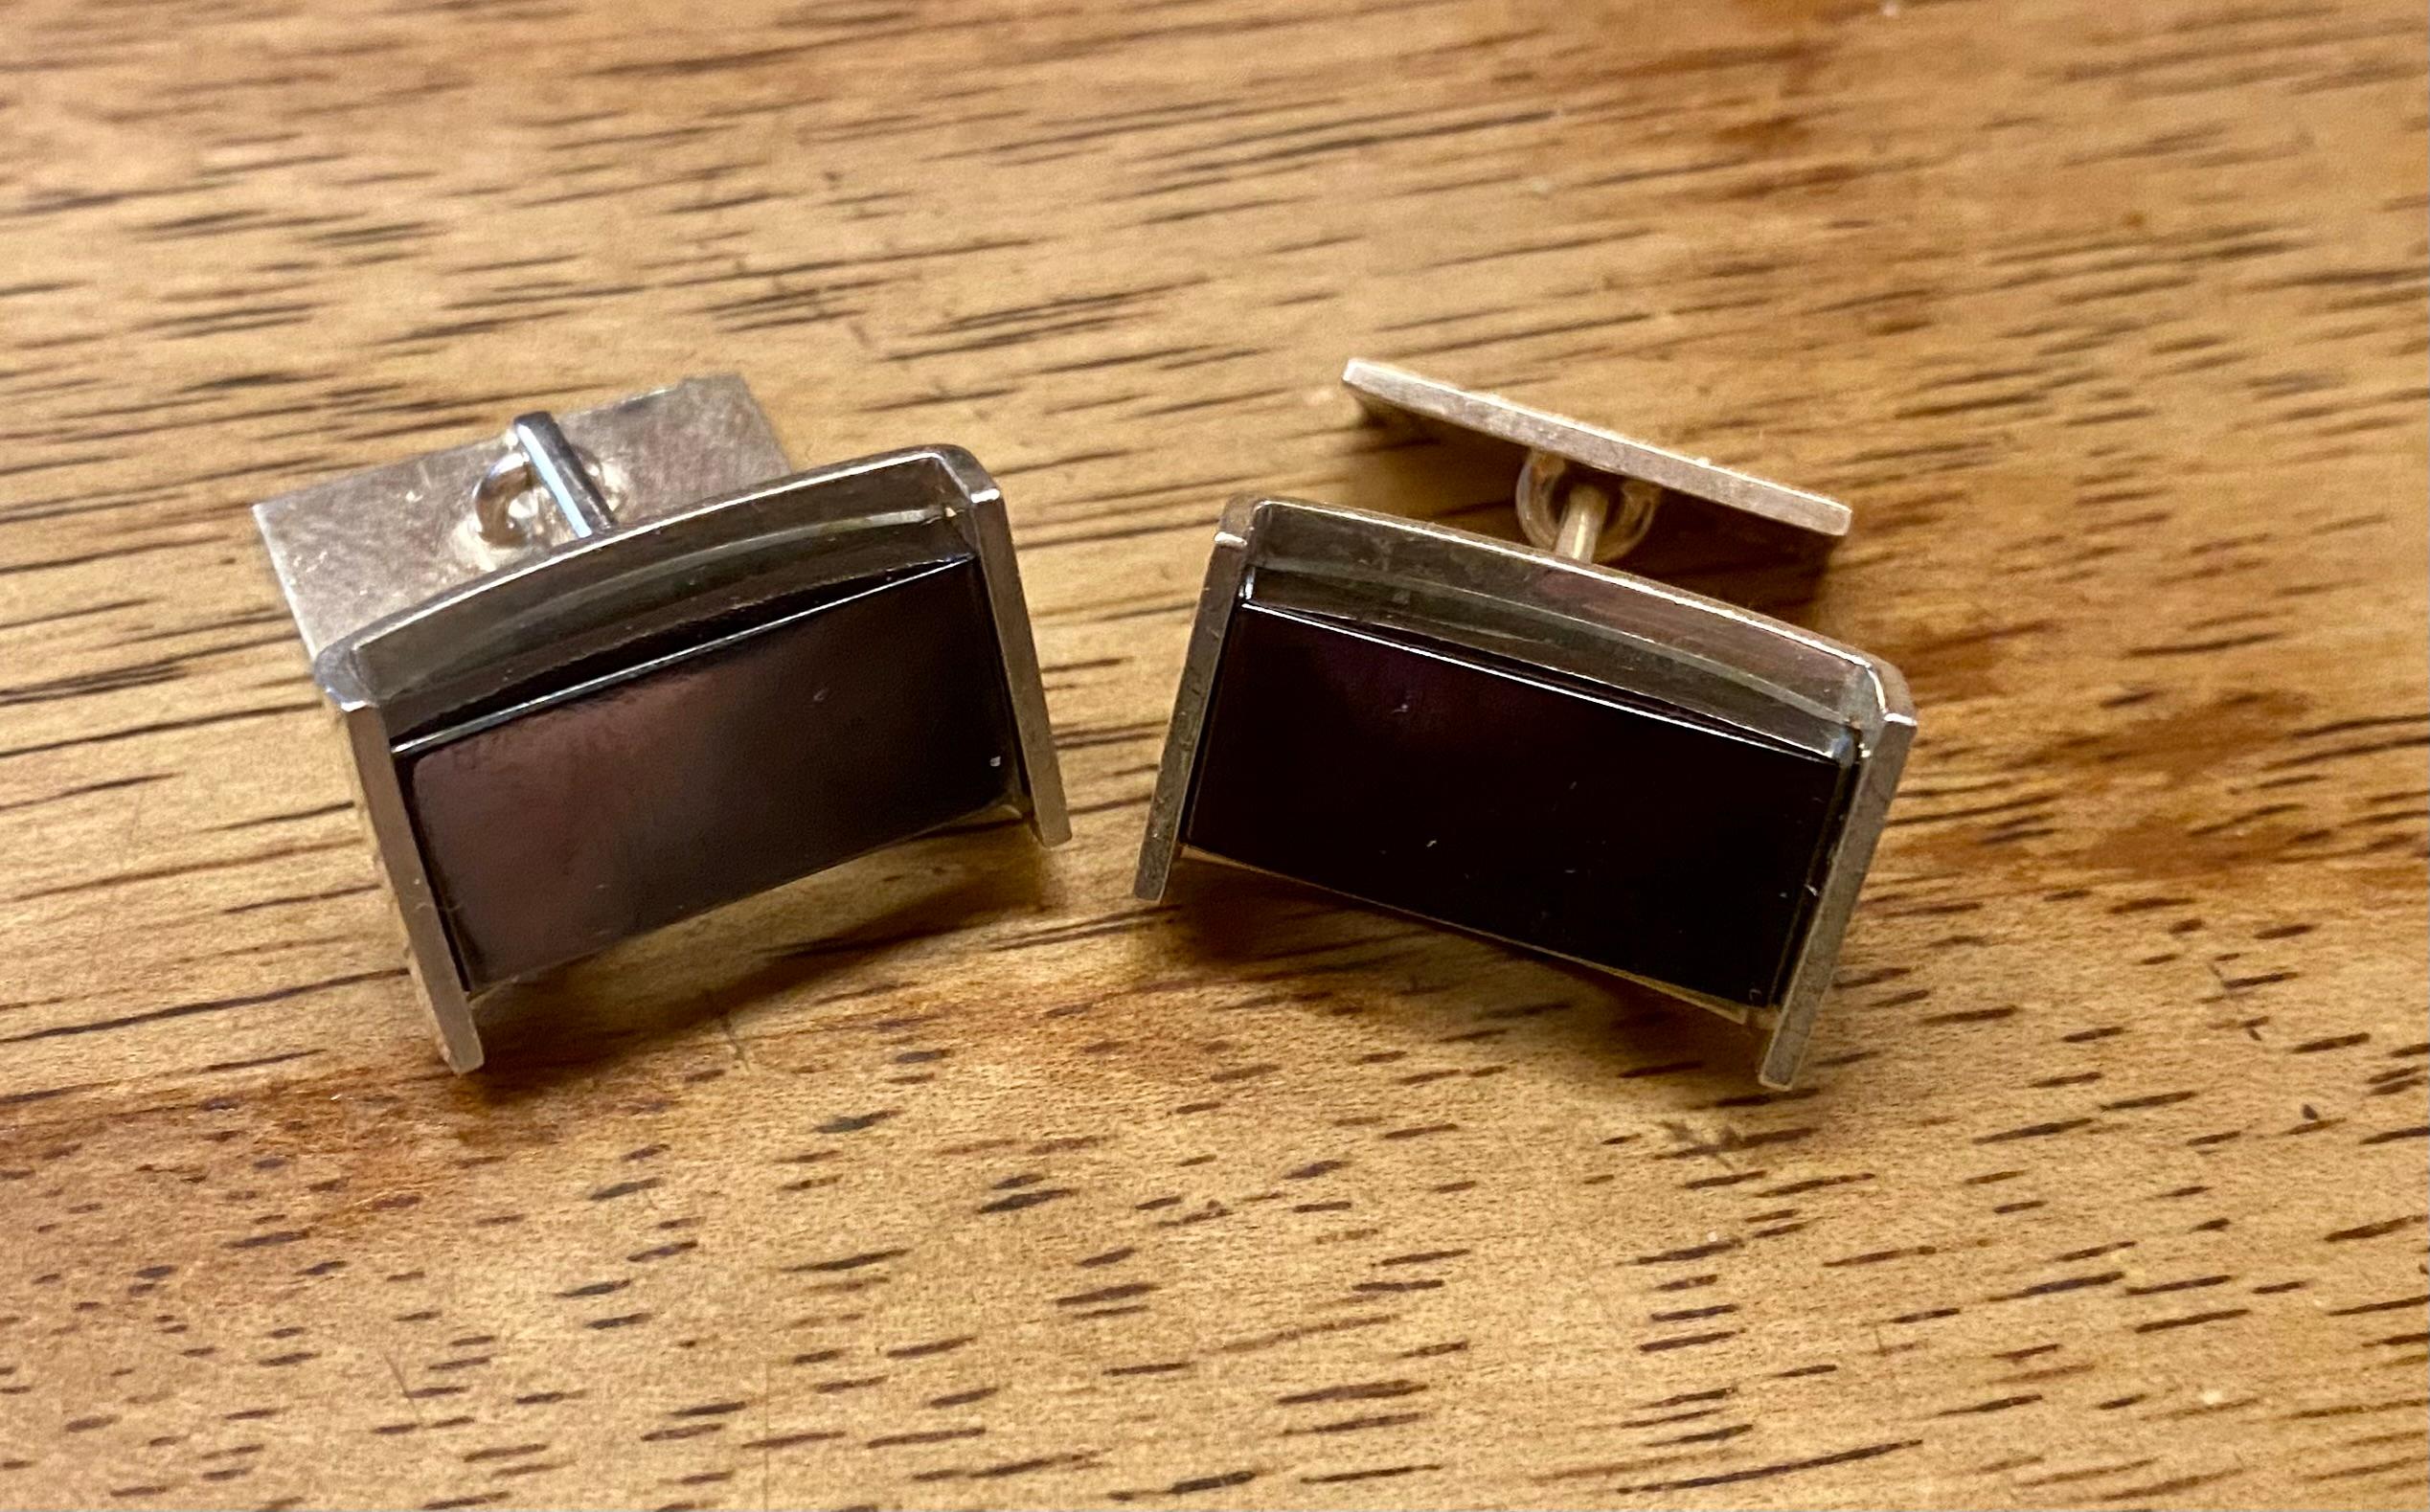 Silver Cufflinks by Elis Kauppi for Kupittaan Kulta, Finland,
Nice stones would be Hematite ?
Made in Finland 1965
813H Silver
Engravings see foto
Great cufflinks